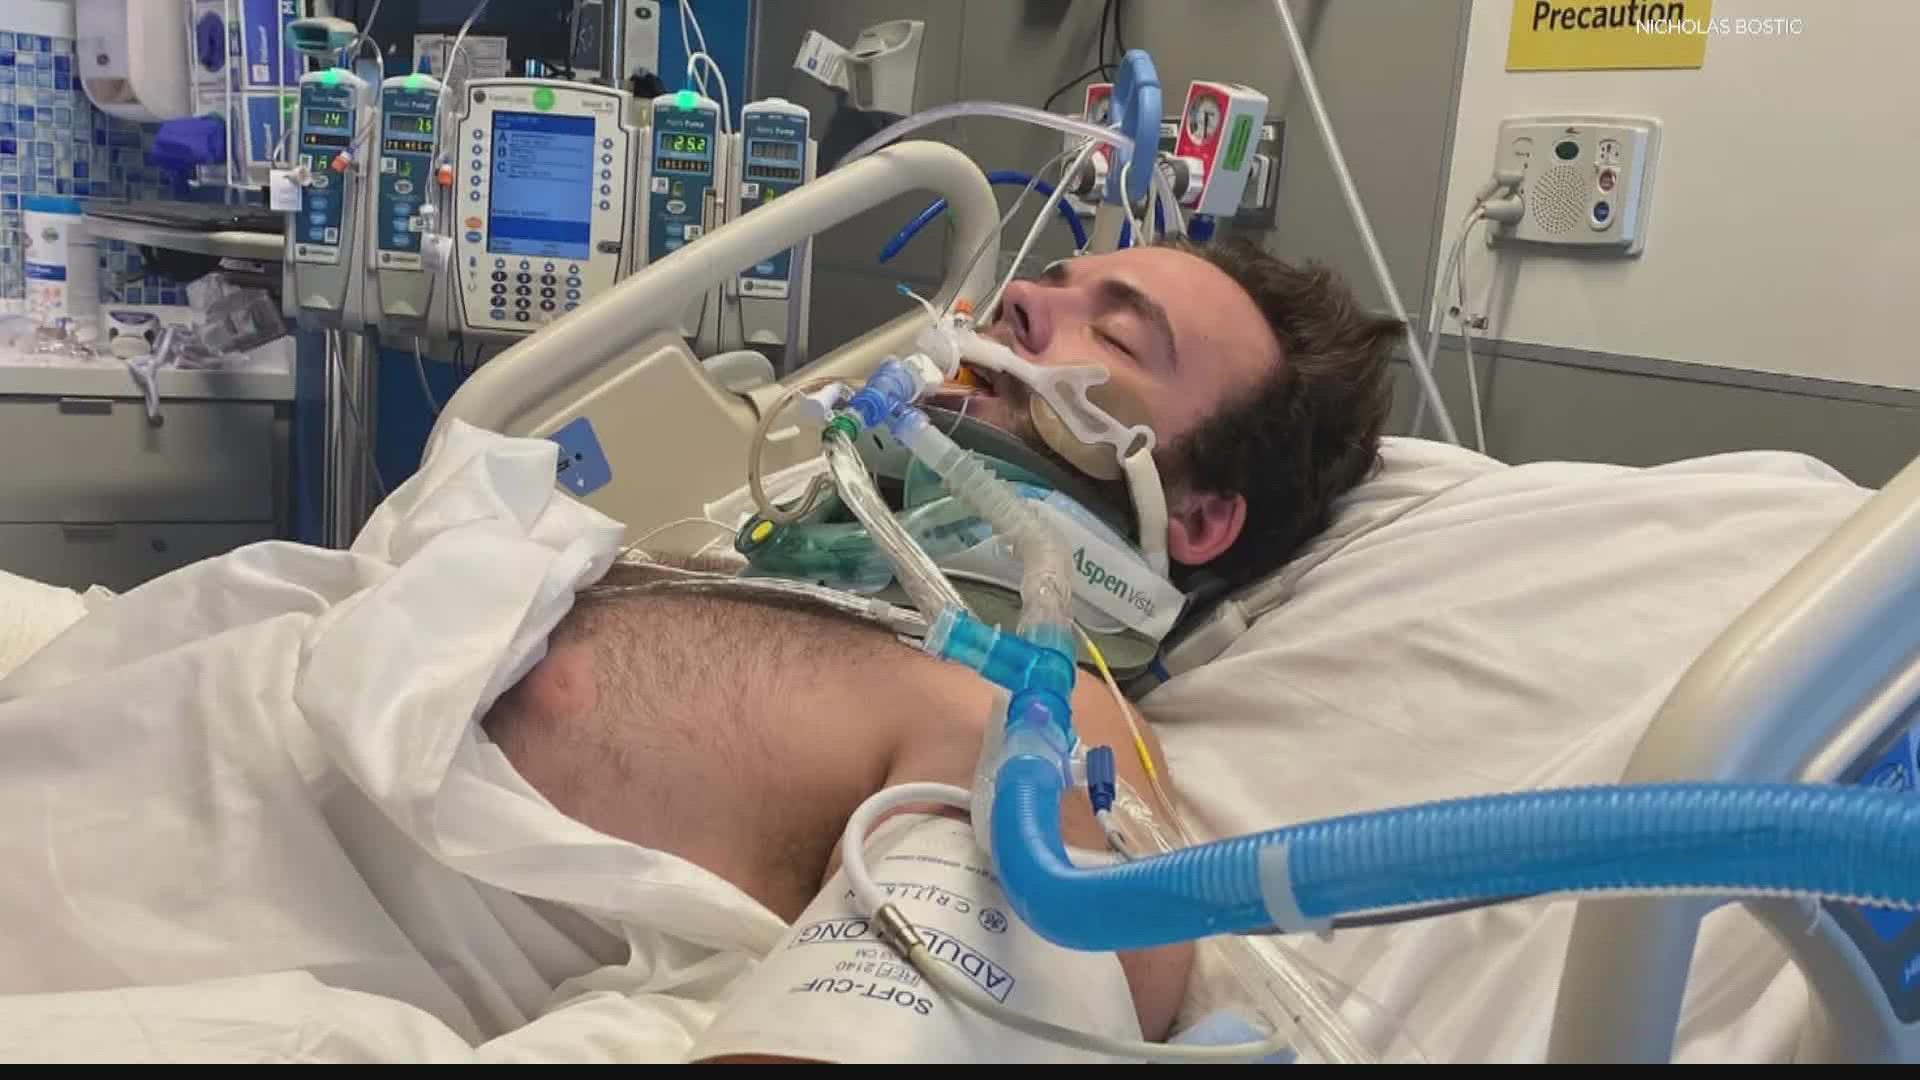 Nick Bostic was called a hero for saving five children from a raging house fire. He opened up to 13News about the real extent of his injuries.